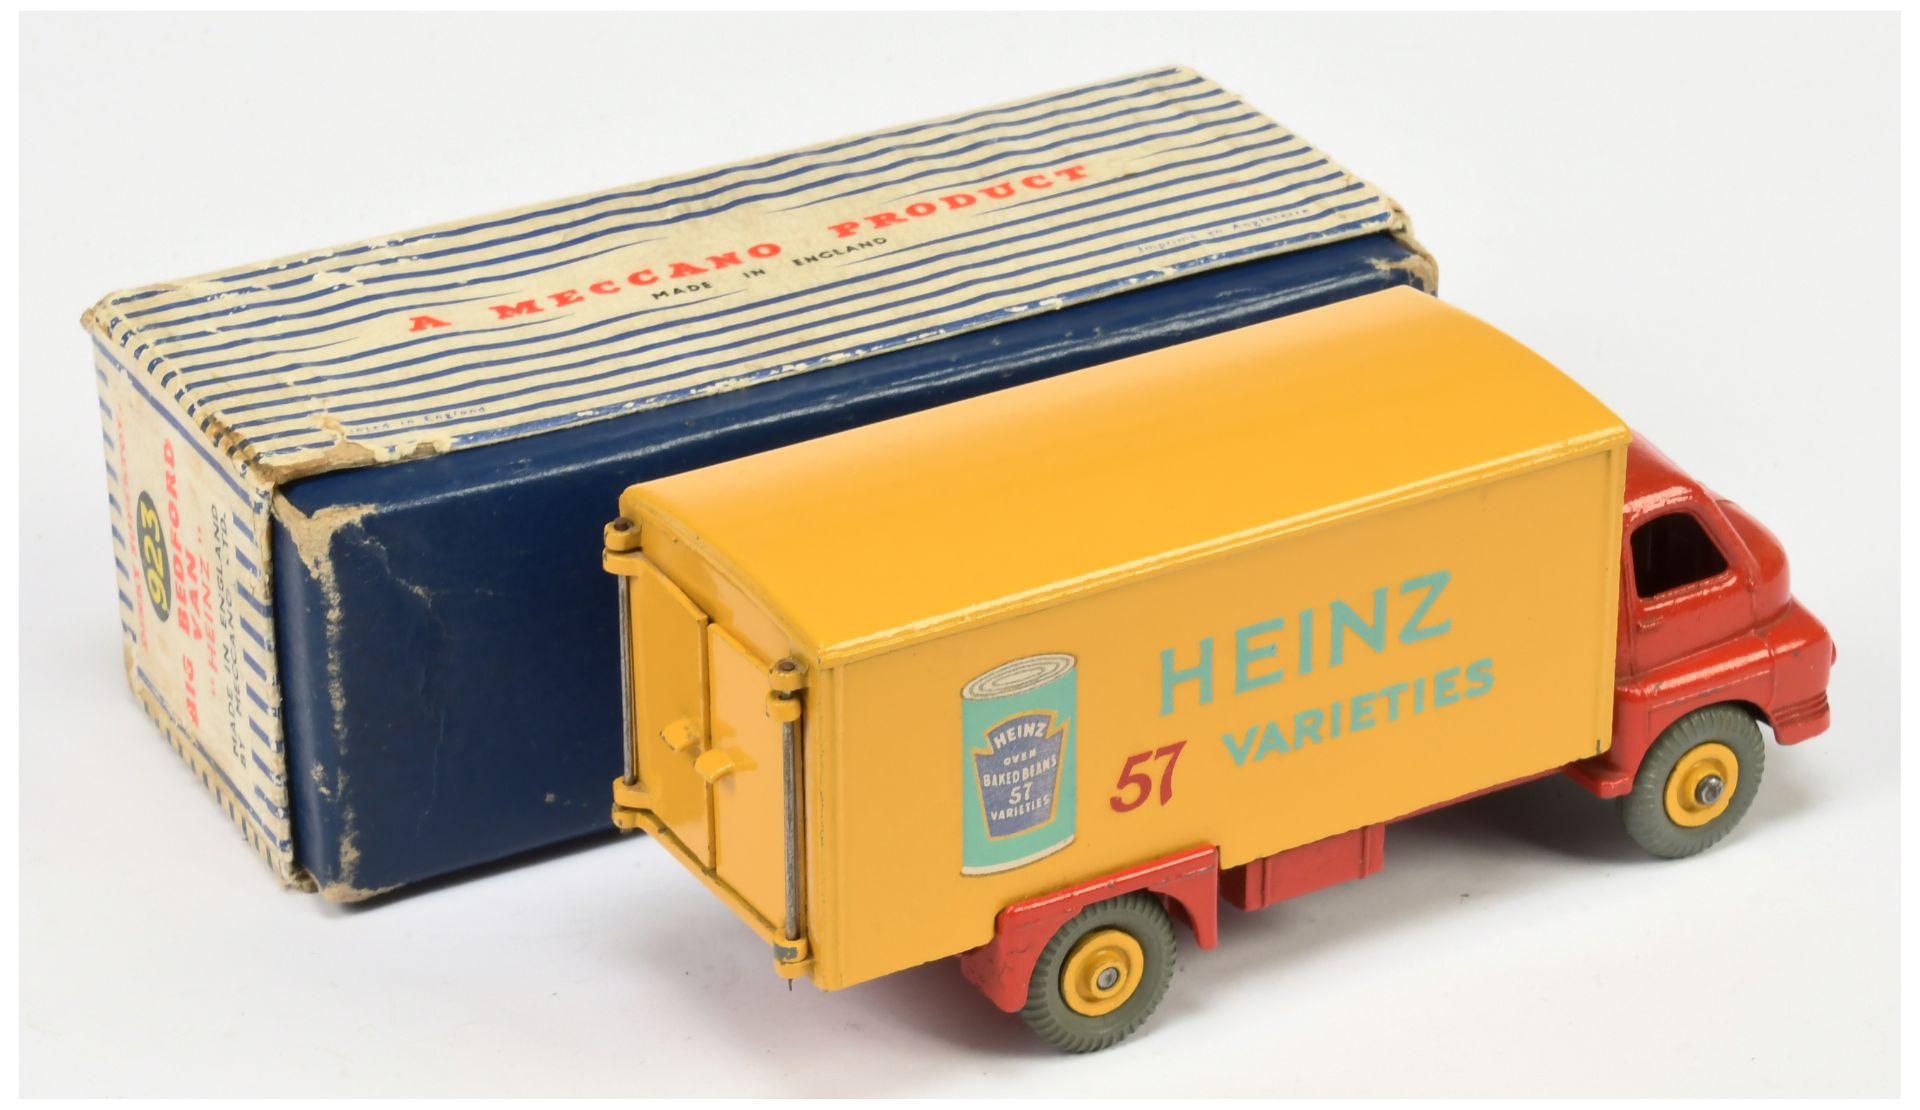 Dinky Toys 923 Big Bedford Van "Heinz 57 Varieties"  - Red cab and chassis, yellow back and super... - Image 2 of 2